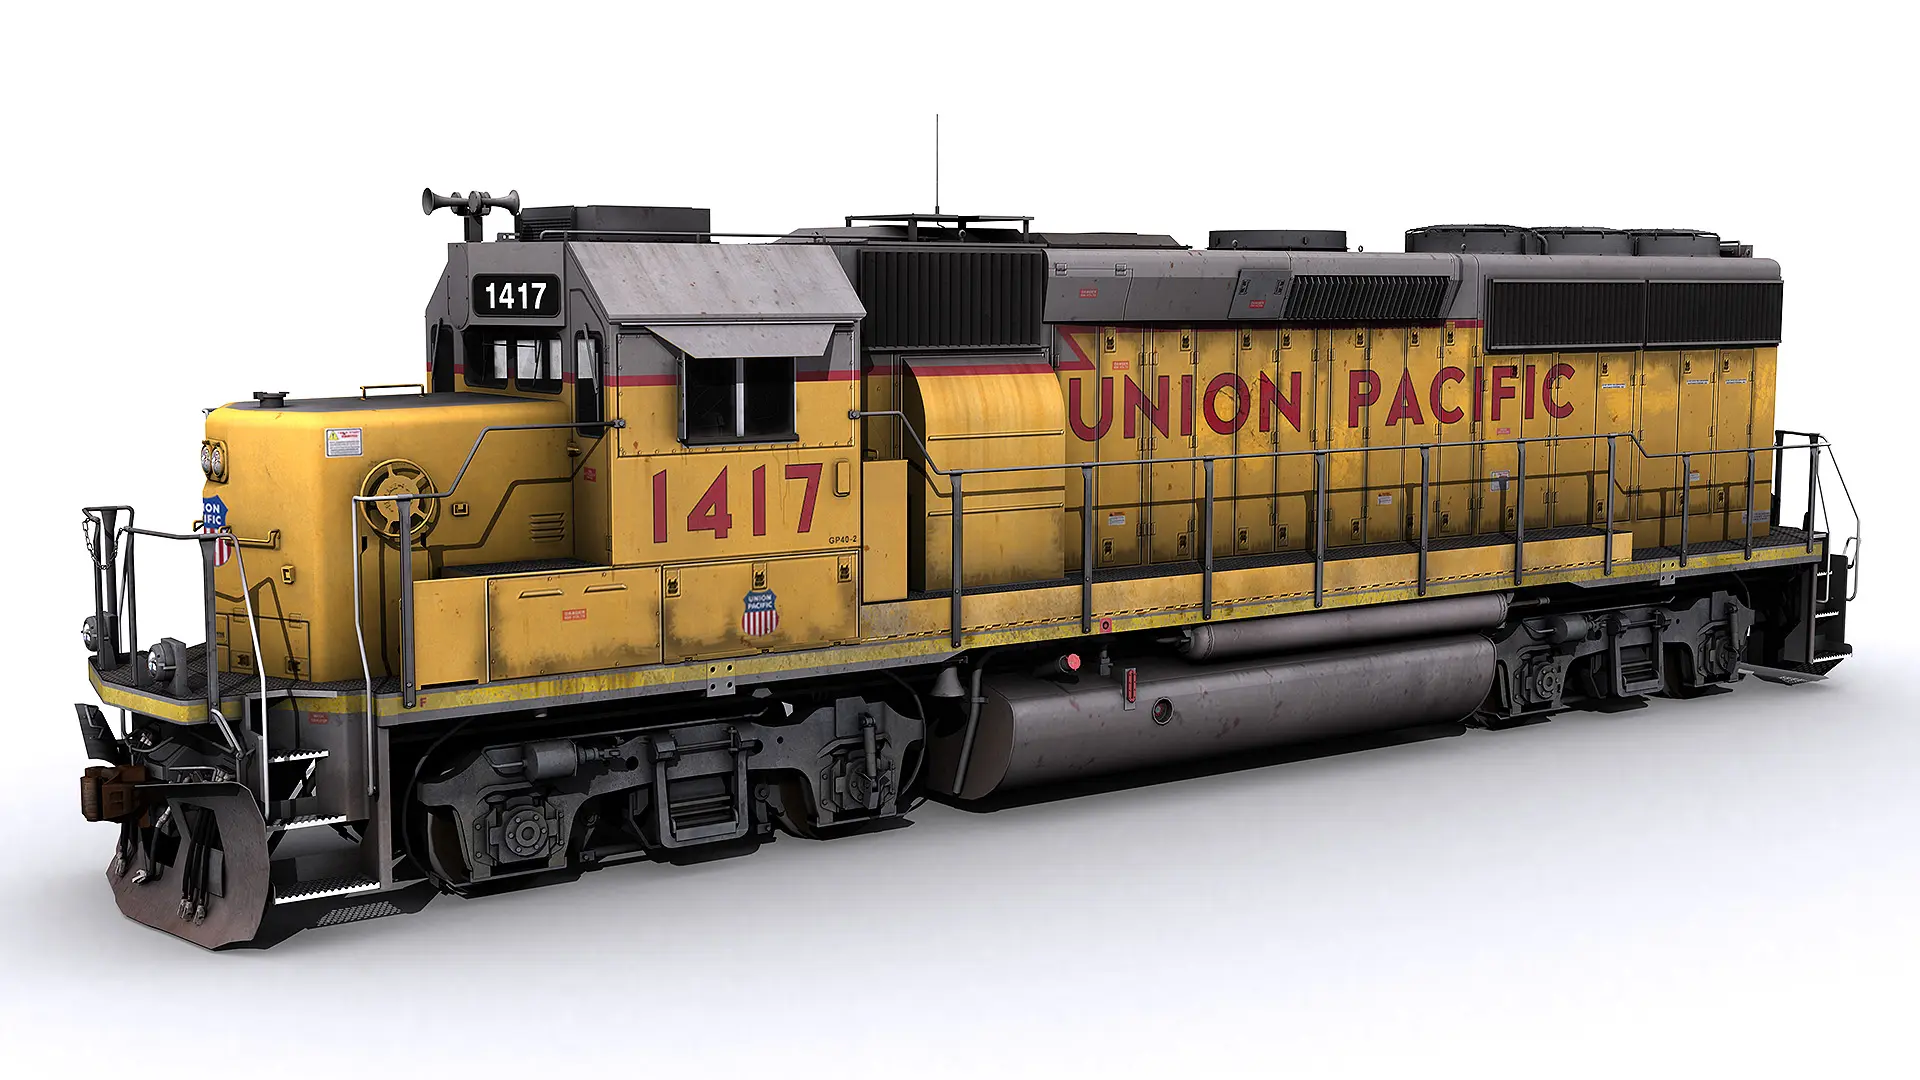 Union Pacific is a prototype engine model